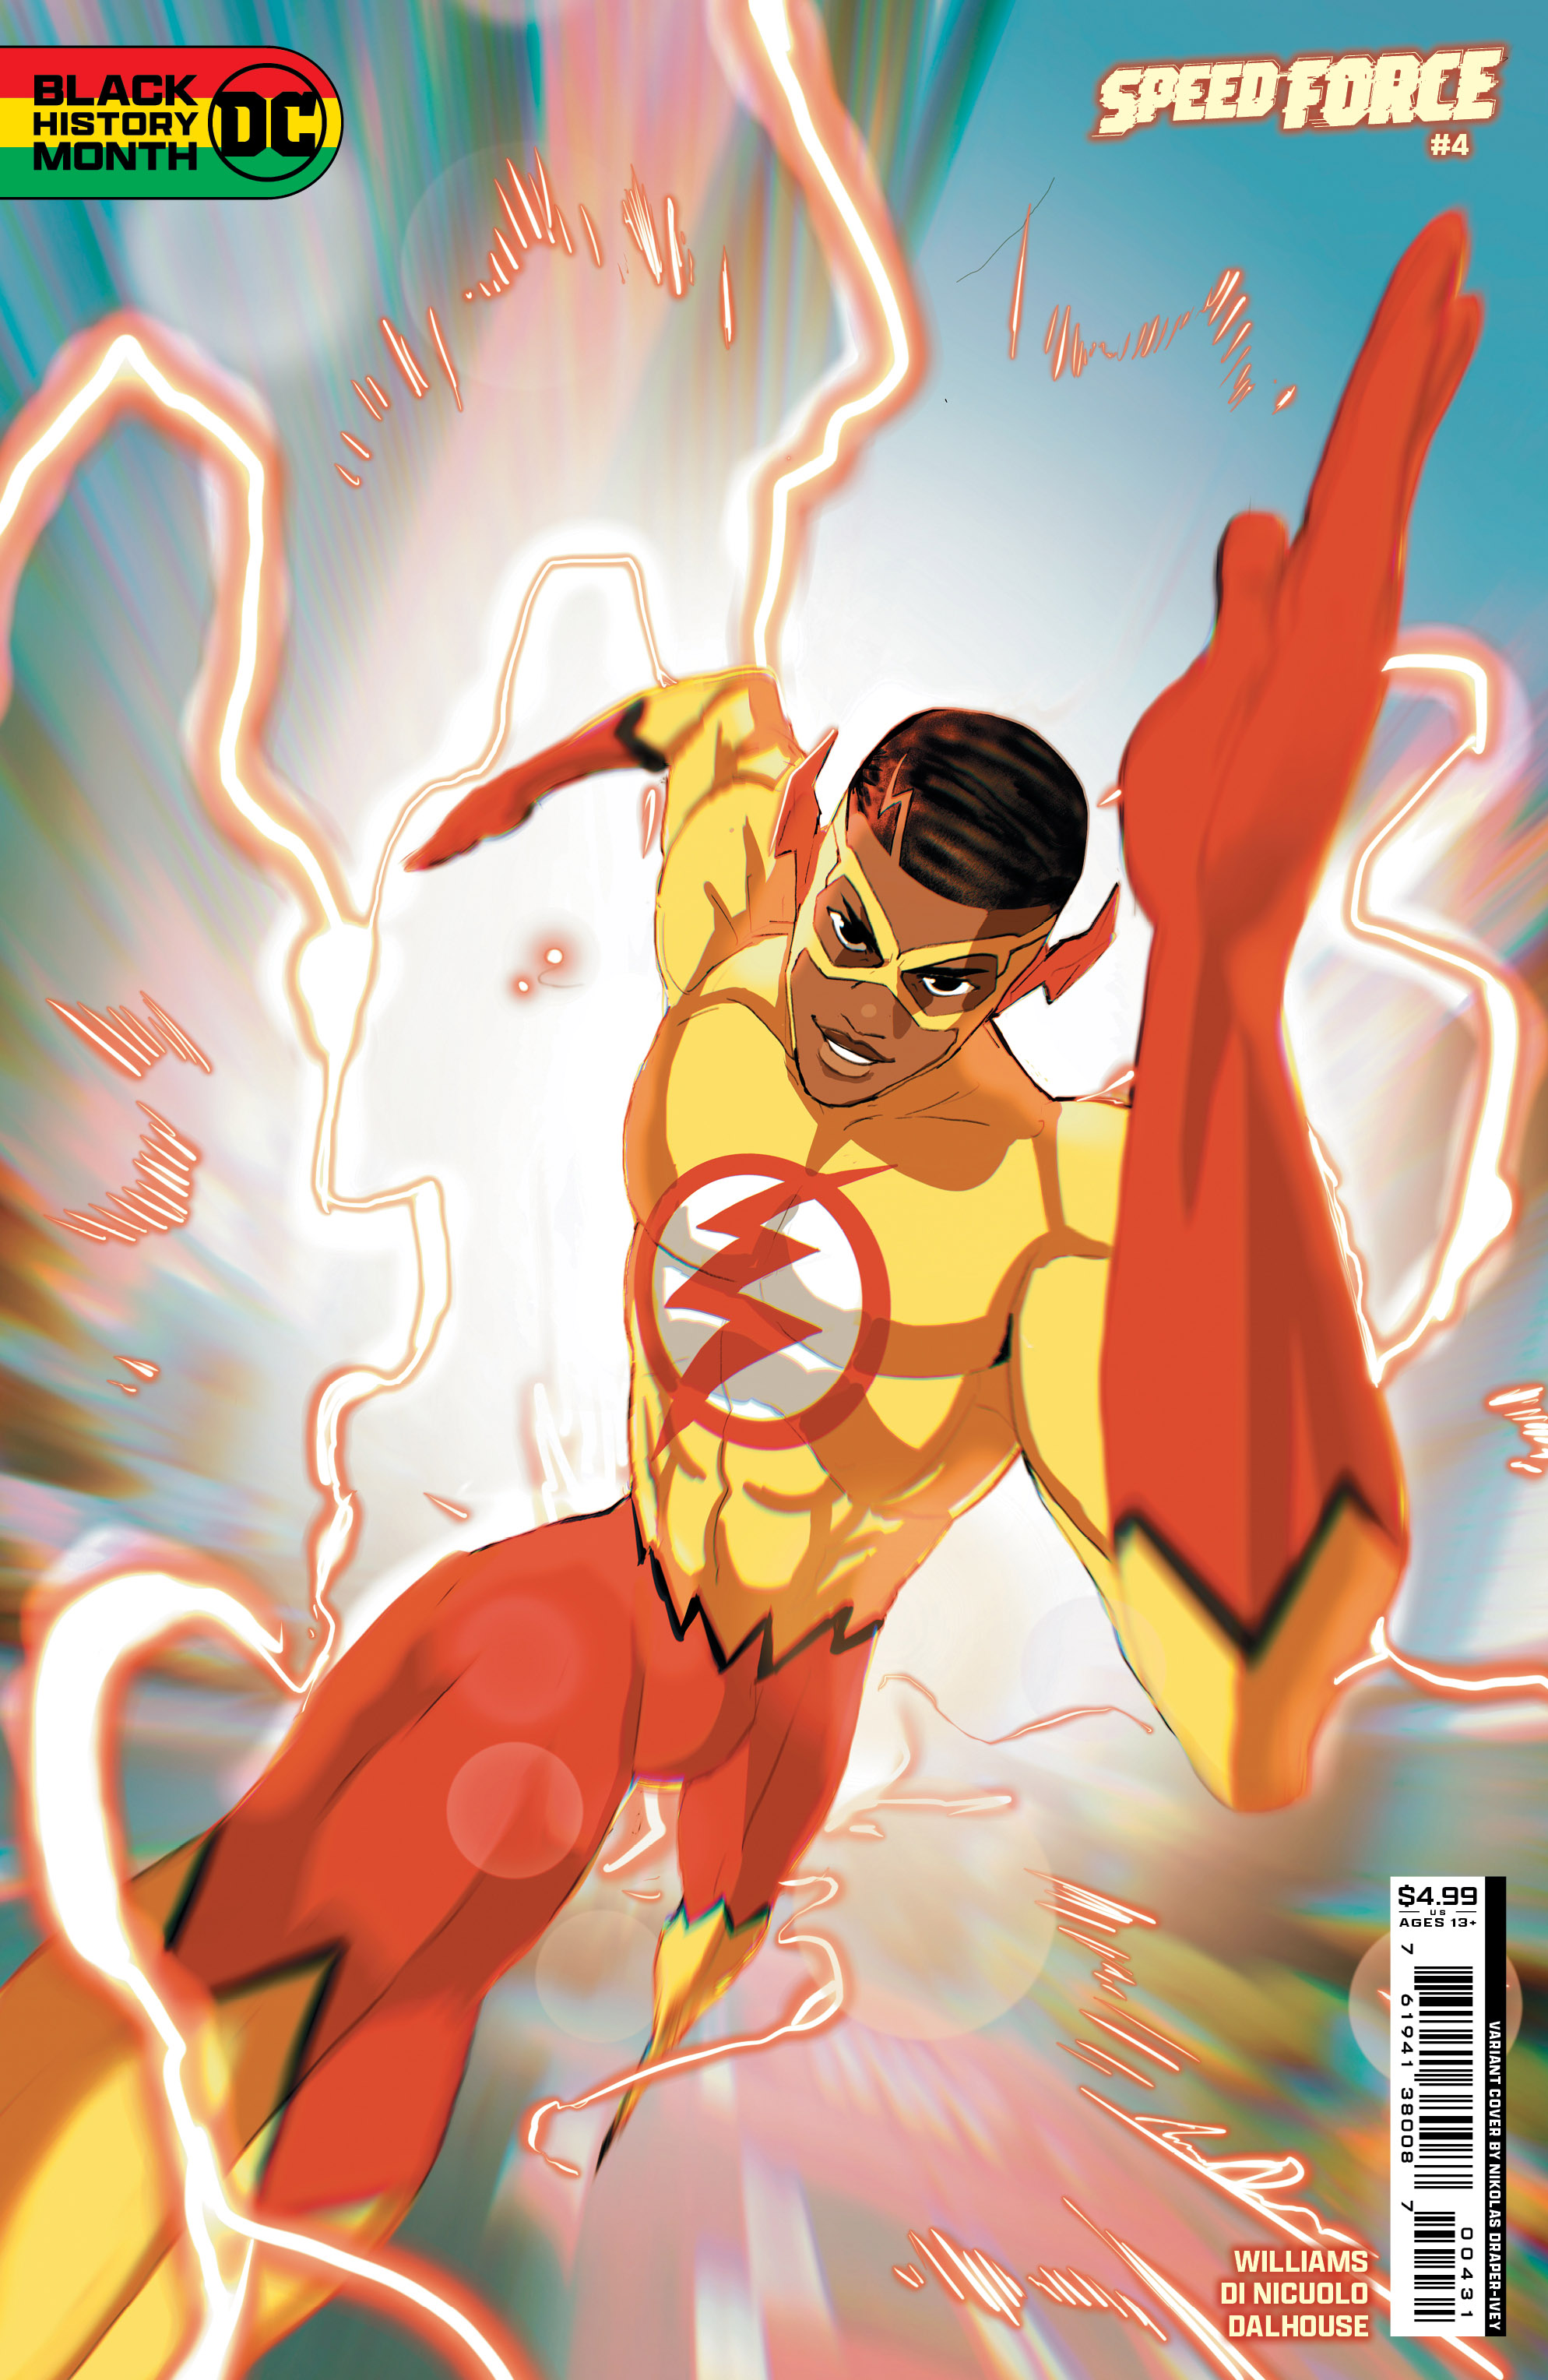 Speed Force #4 Cover C Nikolas Draper-Ivey Black History Month Card Stock Variant (Of 6)